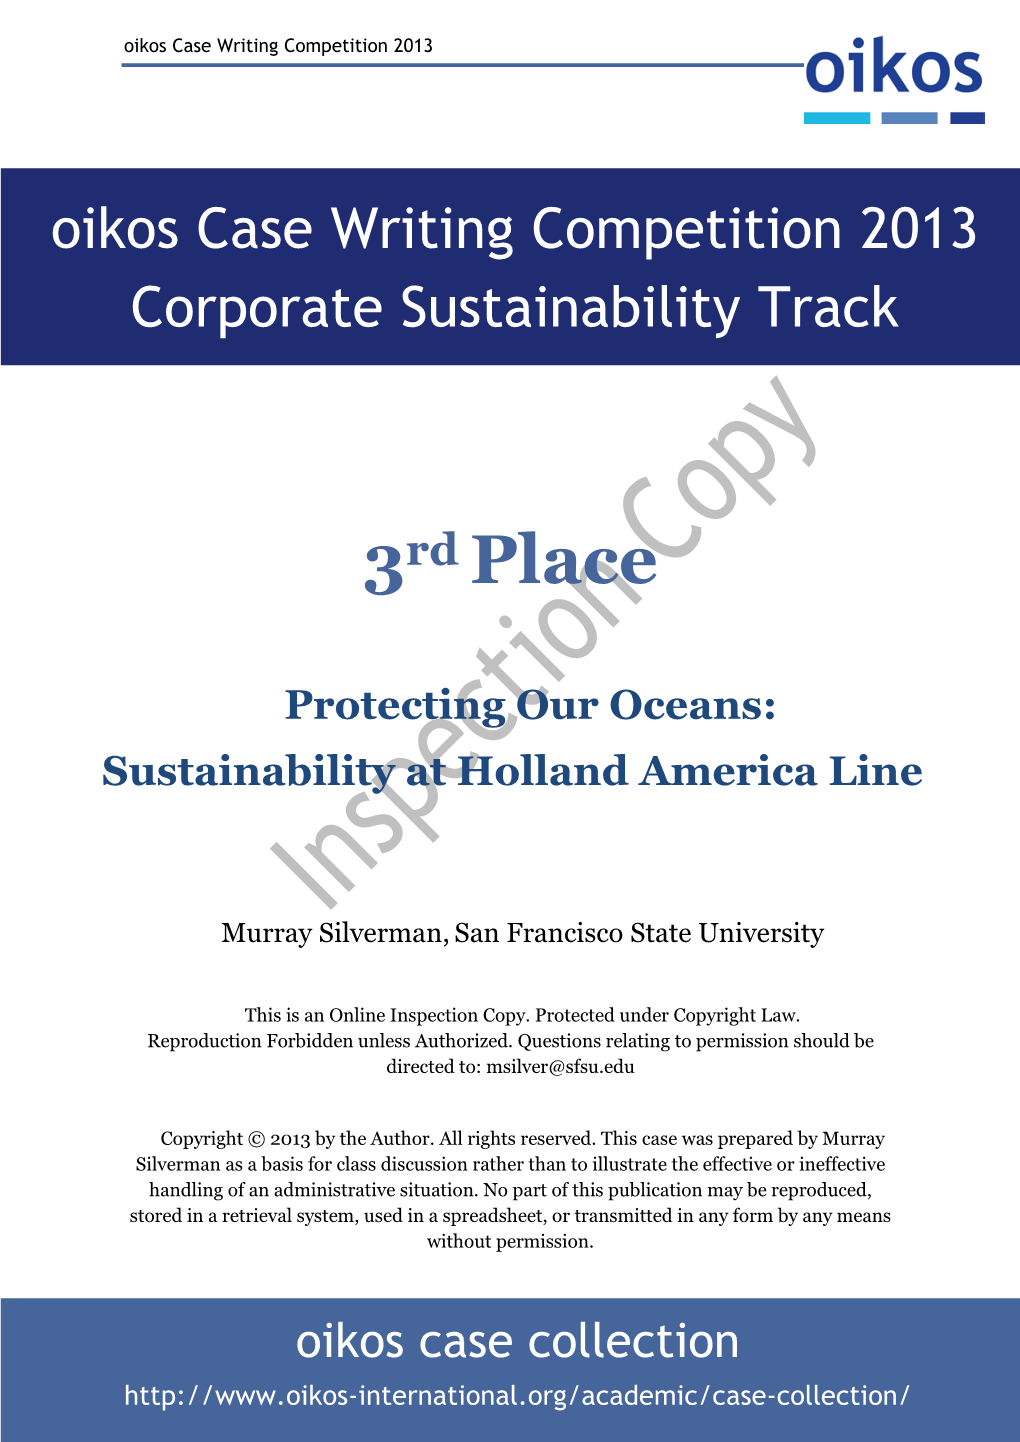 Oikos Case Writing Competition 2013 Corporate Sustainability Track